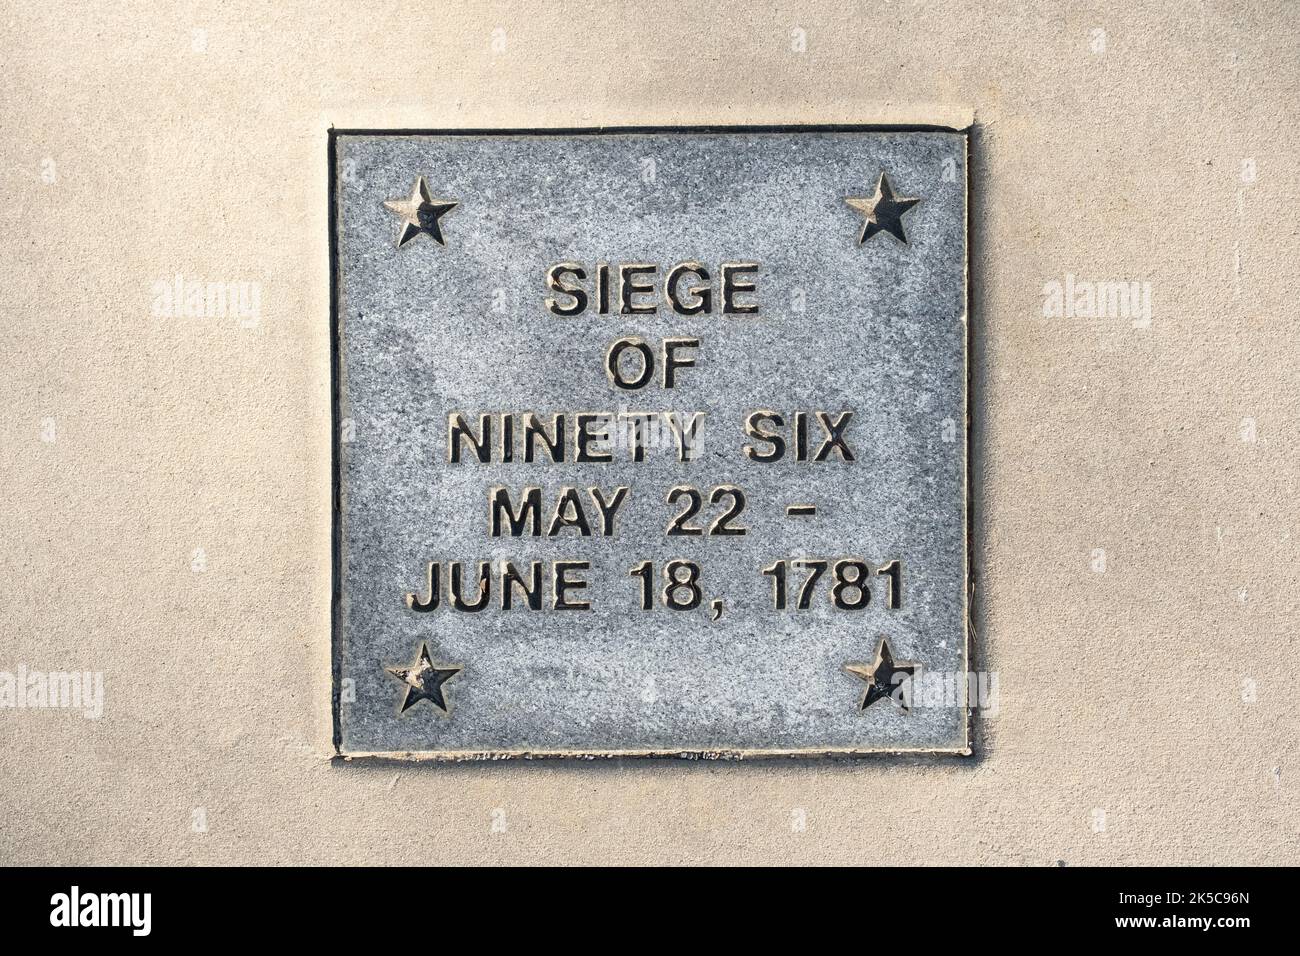 Metal plaque marking the Siege of Ninety Six May 22- June 18, 1781 Stock Photo